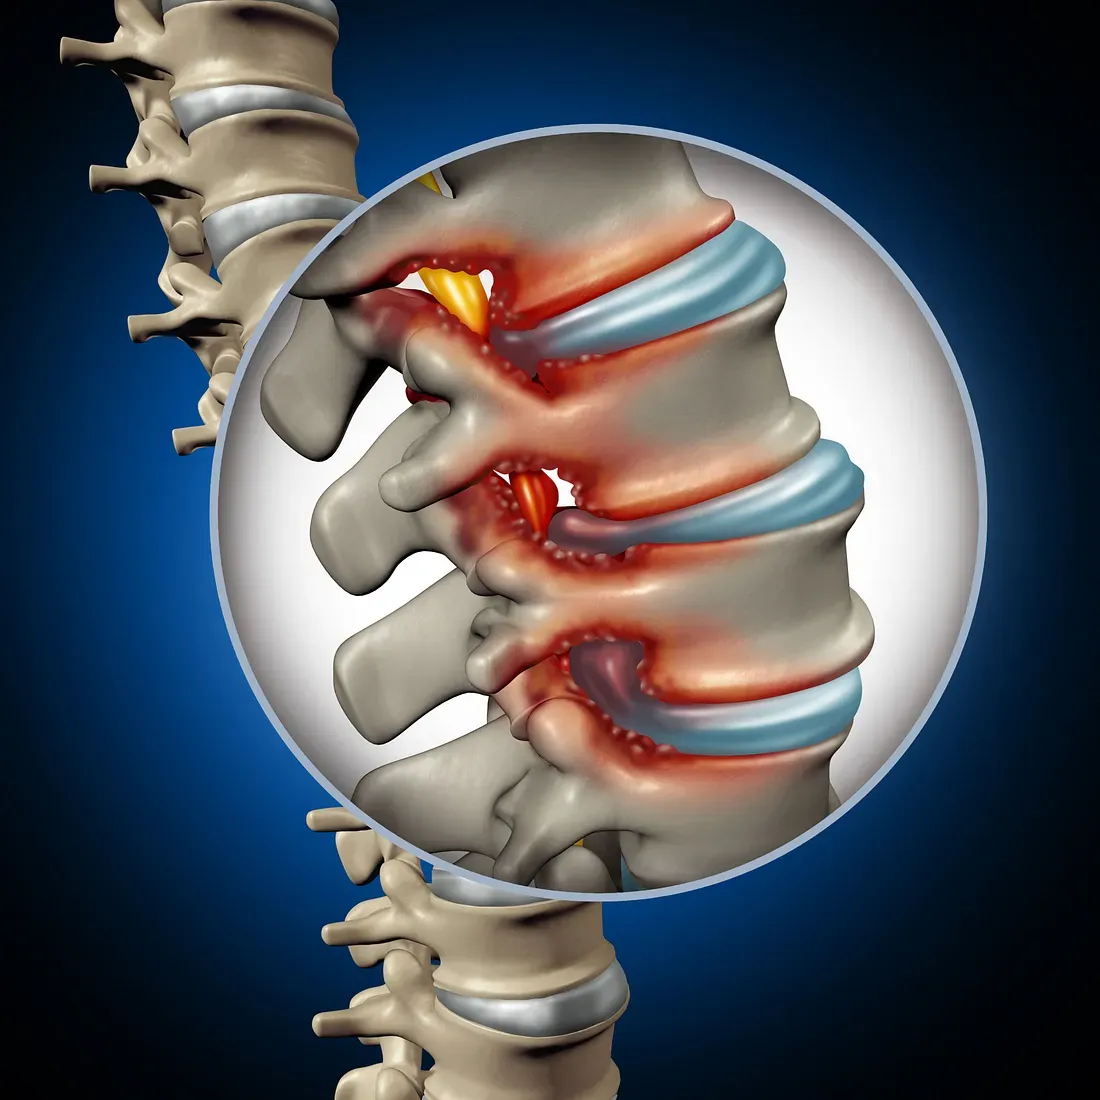 Spinal Stenosis Surgery: An Overview on Treatment Options